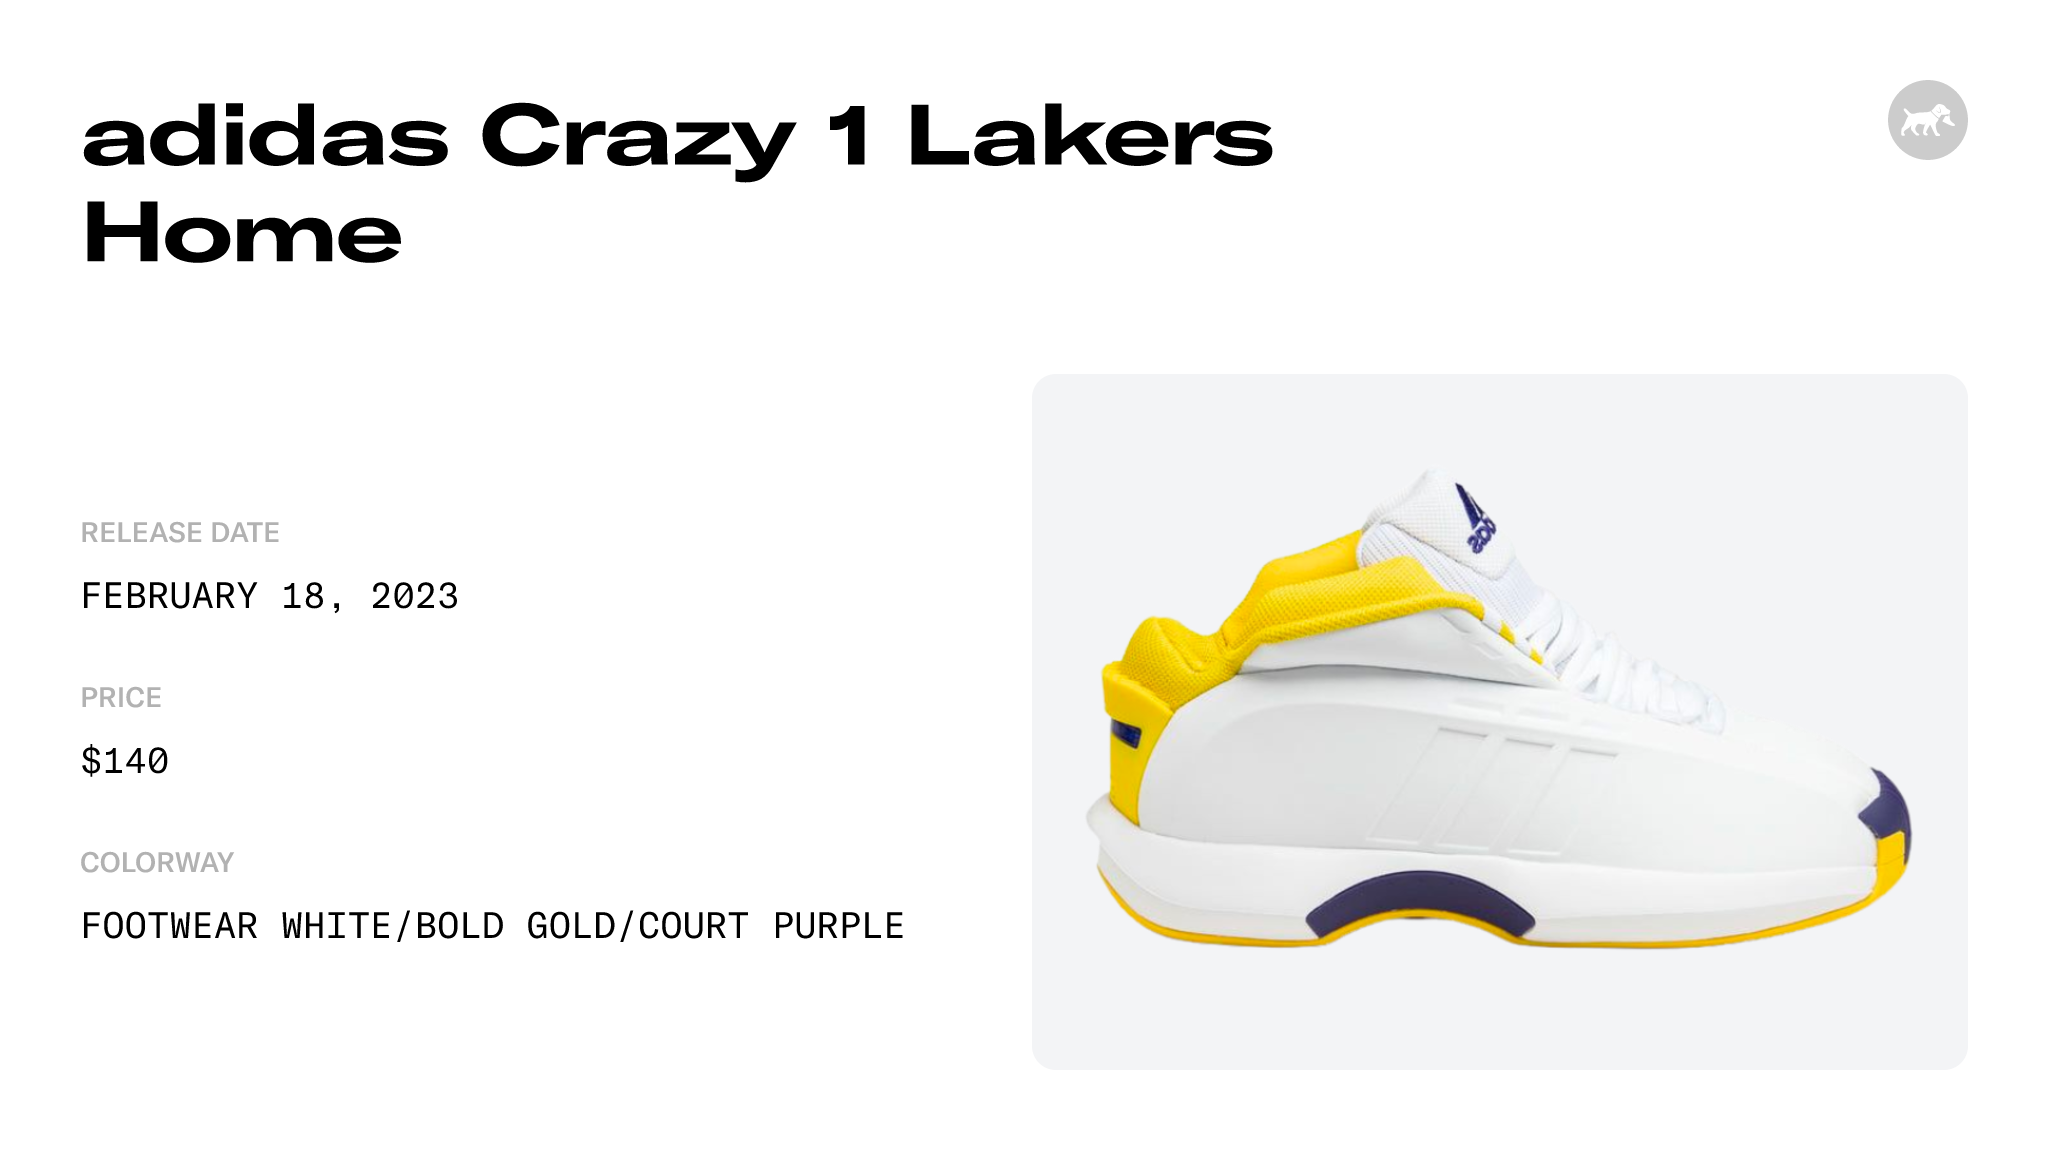 adidas Crazy 1 Lakers Home - GY8947 Raffles and Release Date